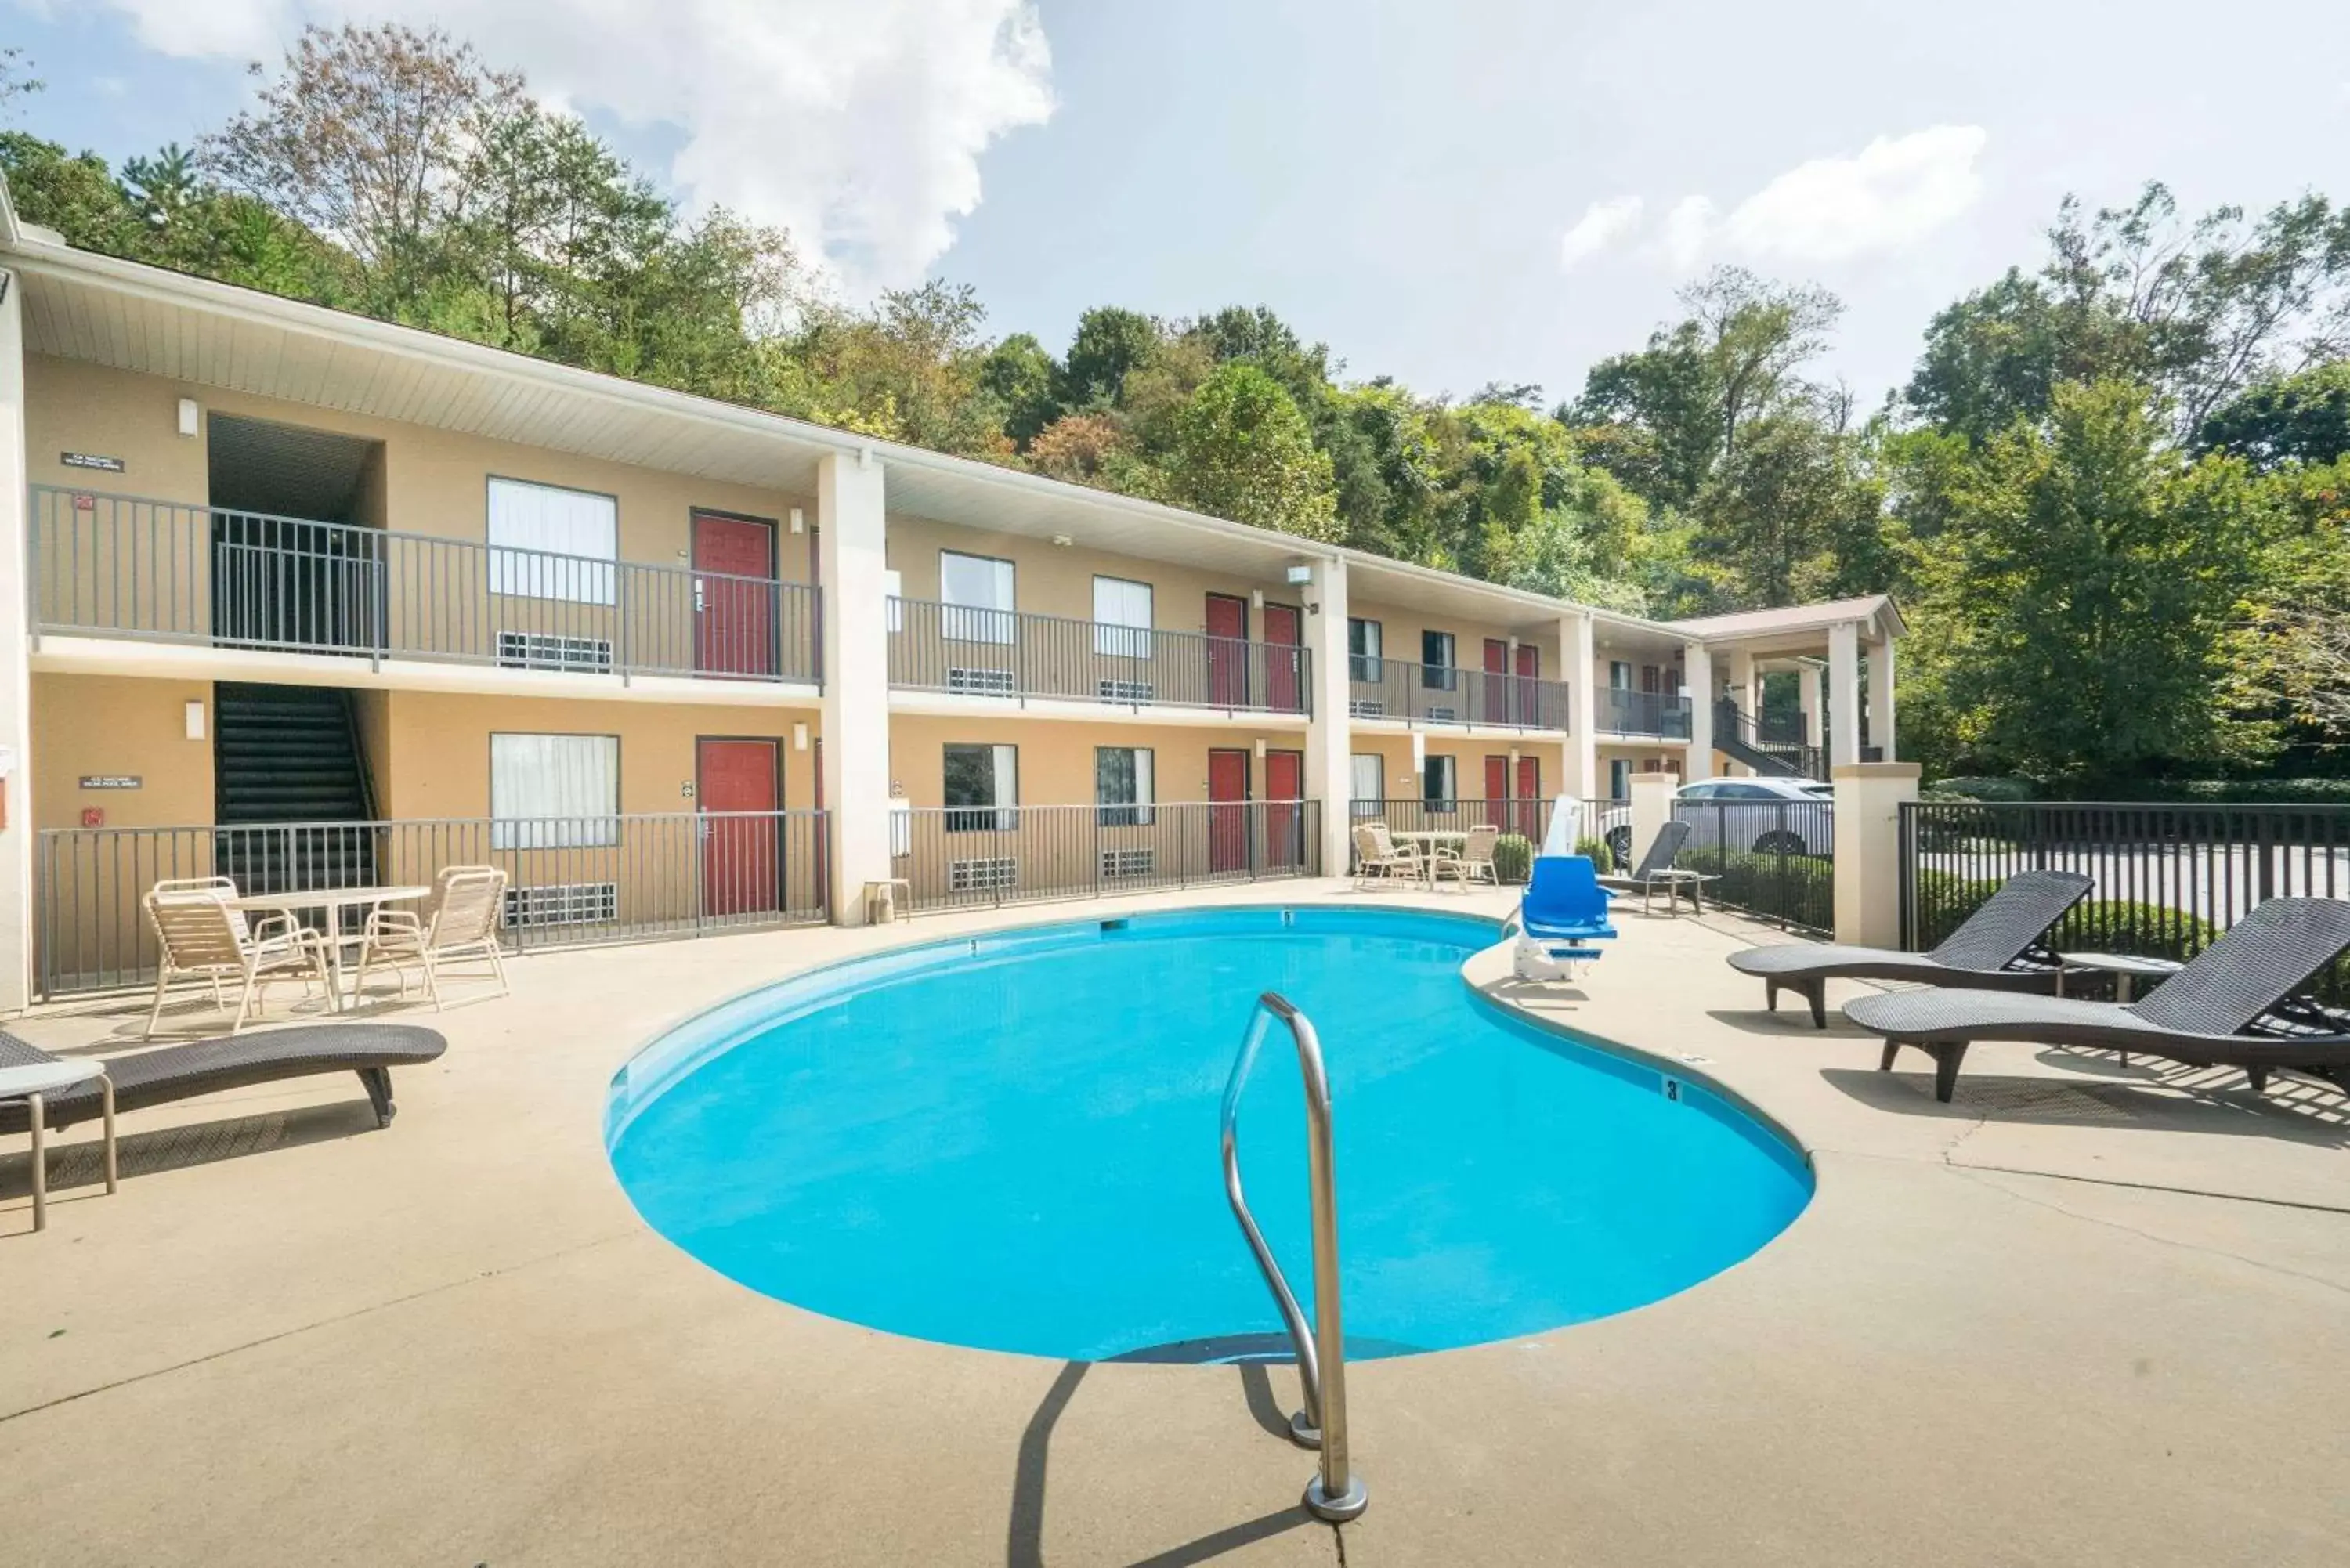 Property building, Swimming Pool in Days Inn by Wyndham Asheville Downtown North